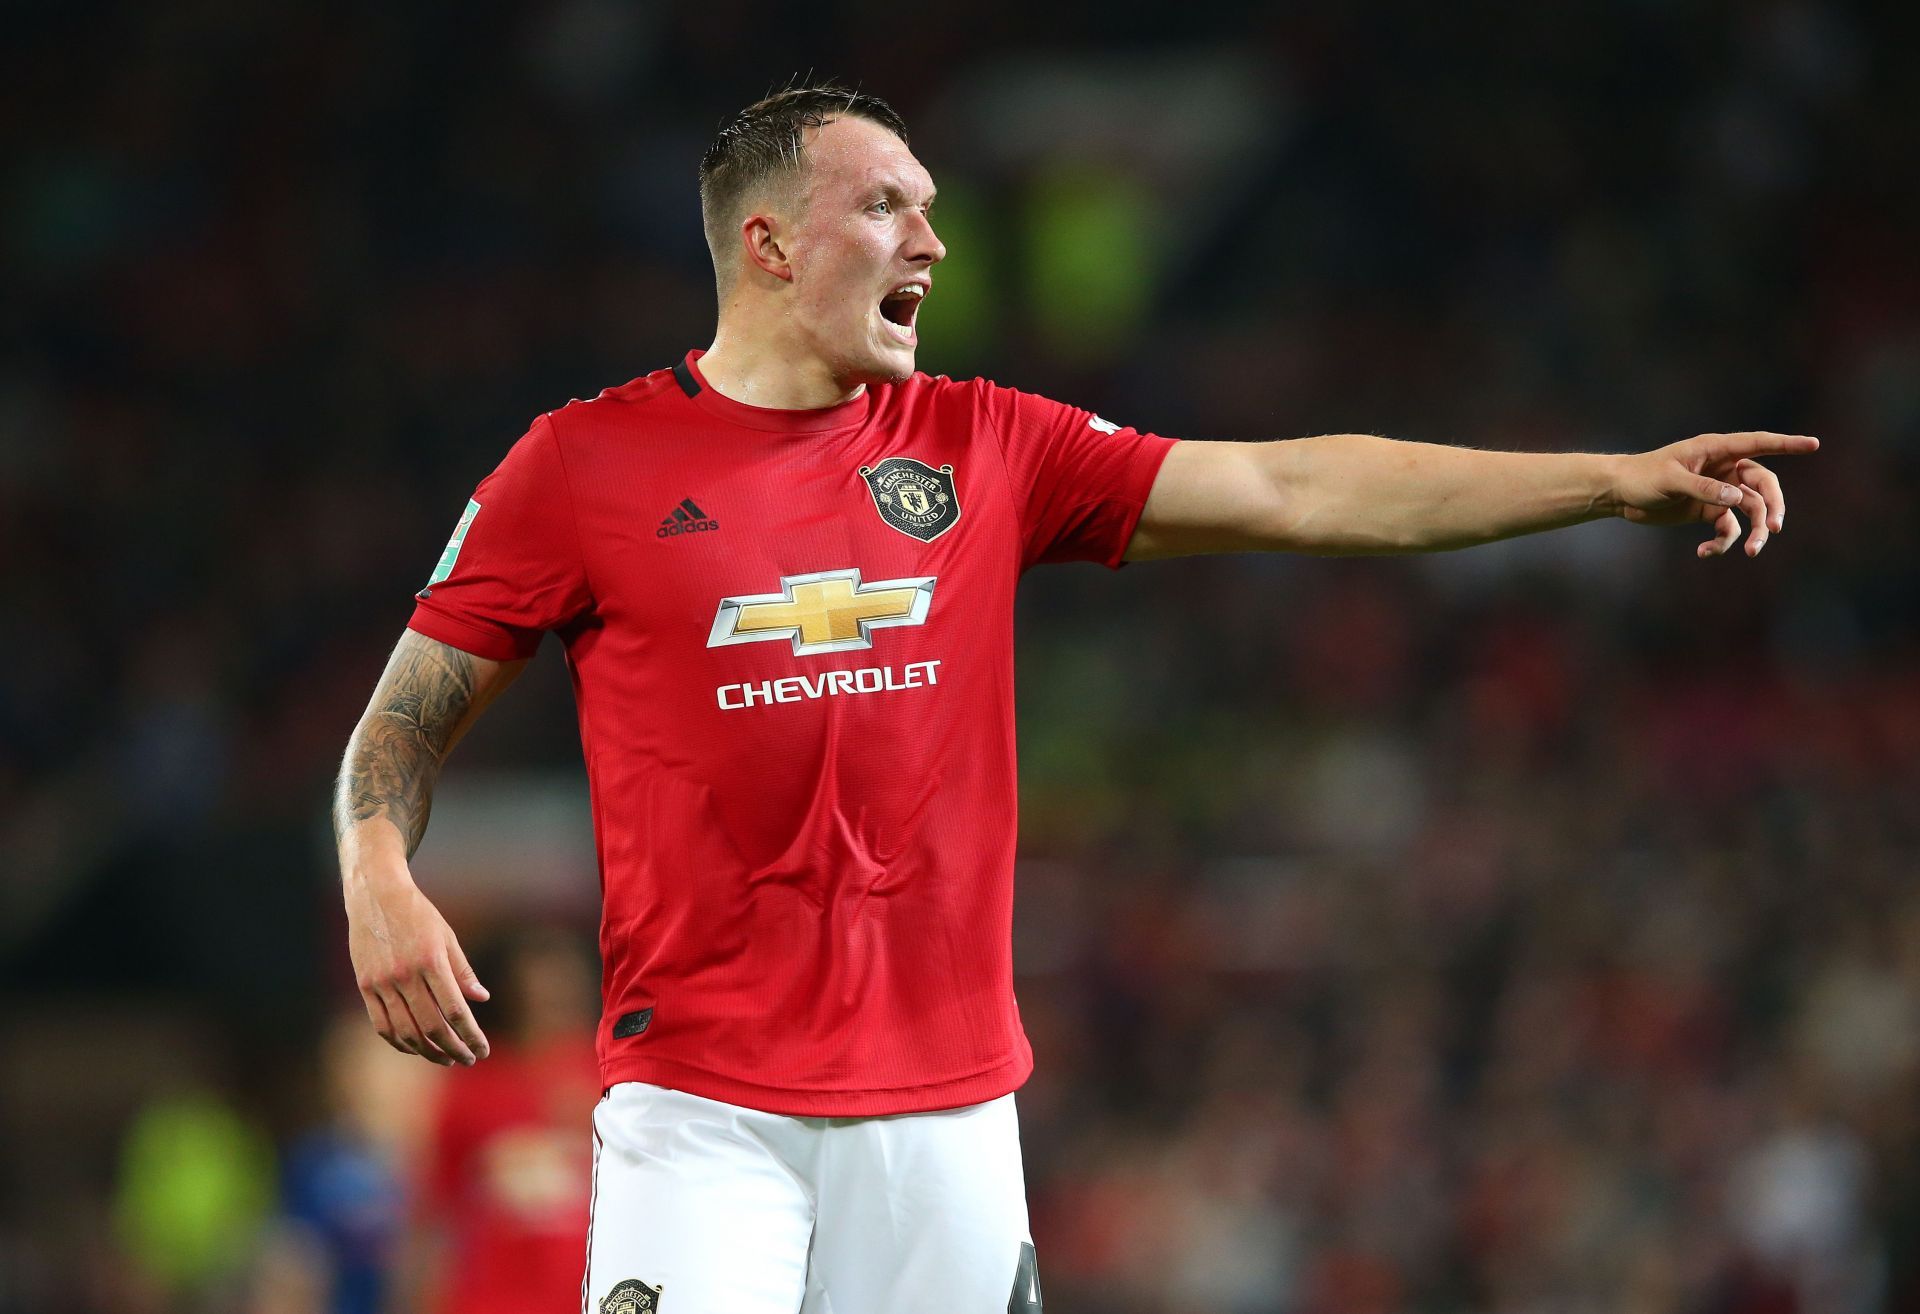 Benfica have emerged as a possible destination for Manchester United outcast Phil Jones